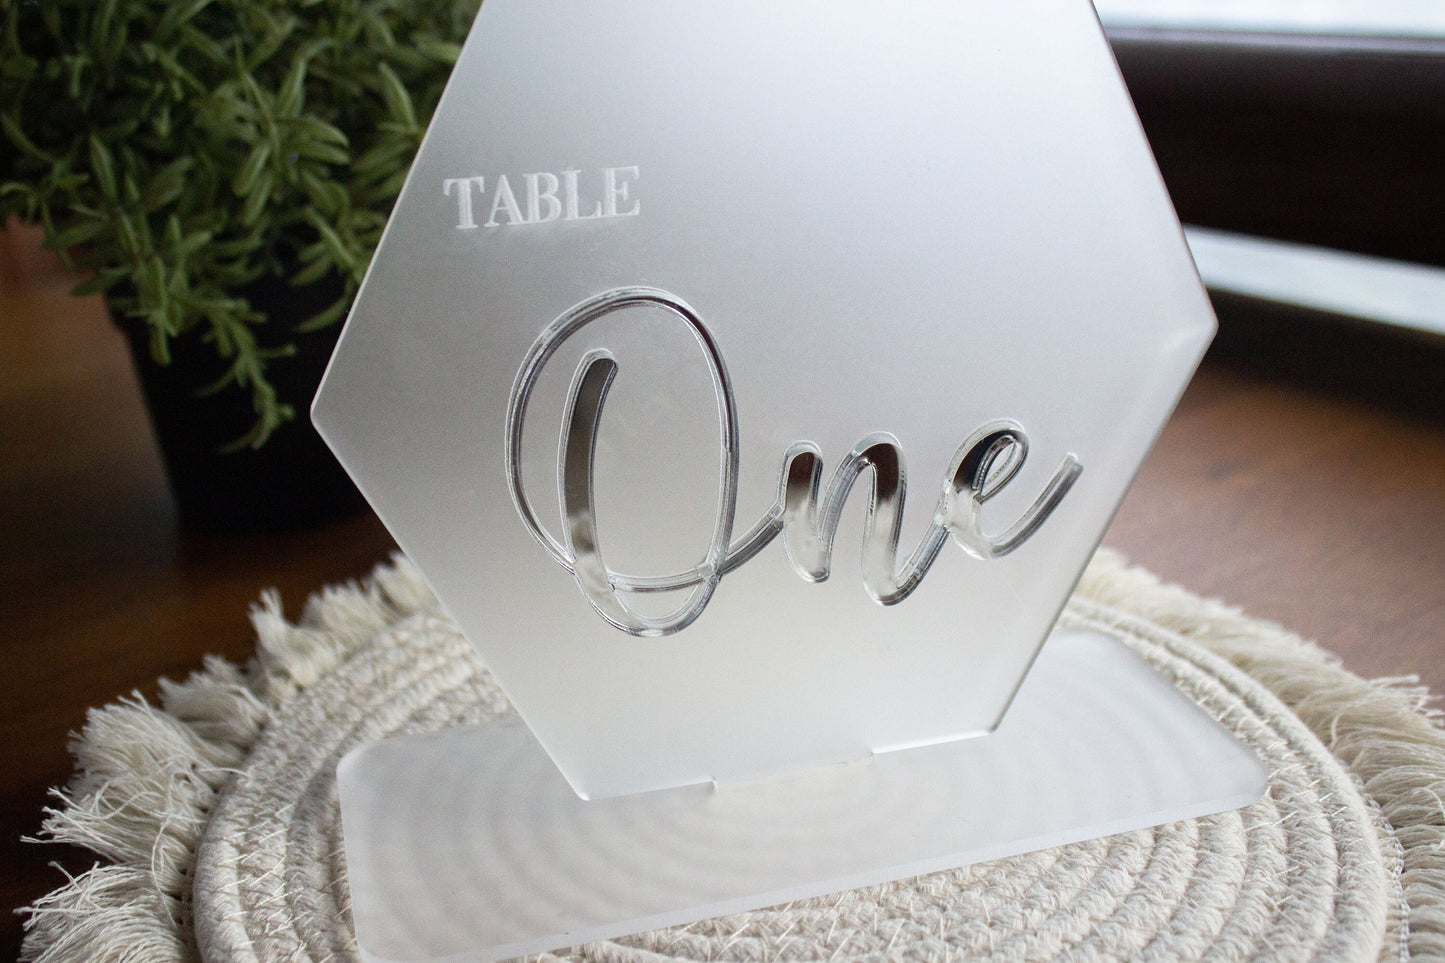 Wedding Table Numbers, Table Numbers, Acrylic Table Numbers, Wedding Table Decor, Wedding Place Cards, Gold Table Numbers, 3D Table Decor